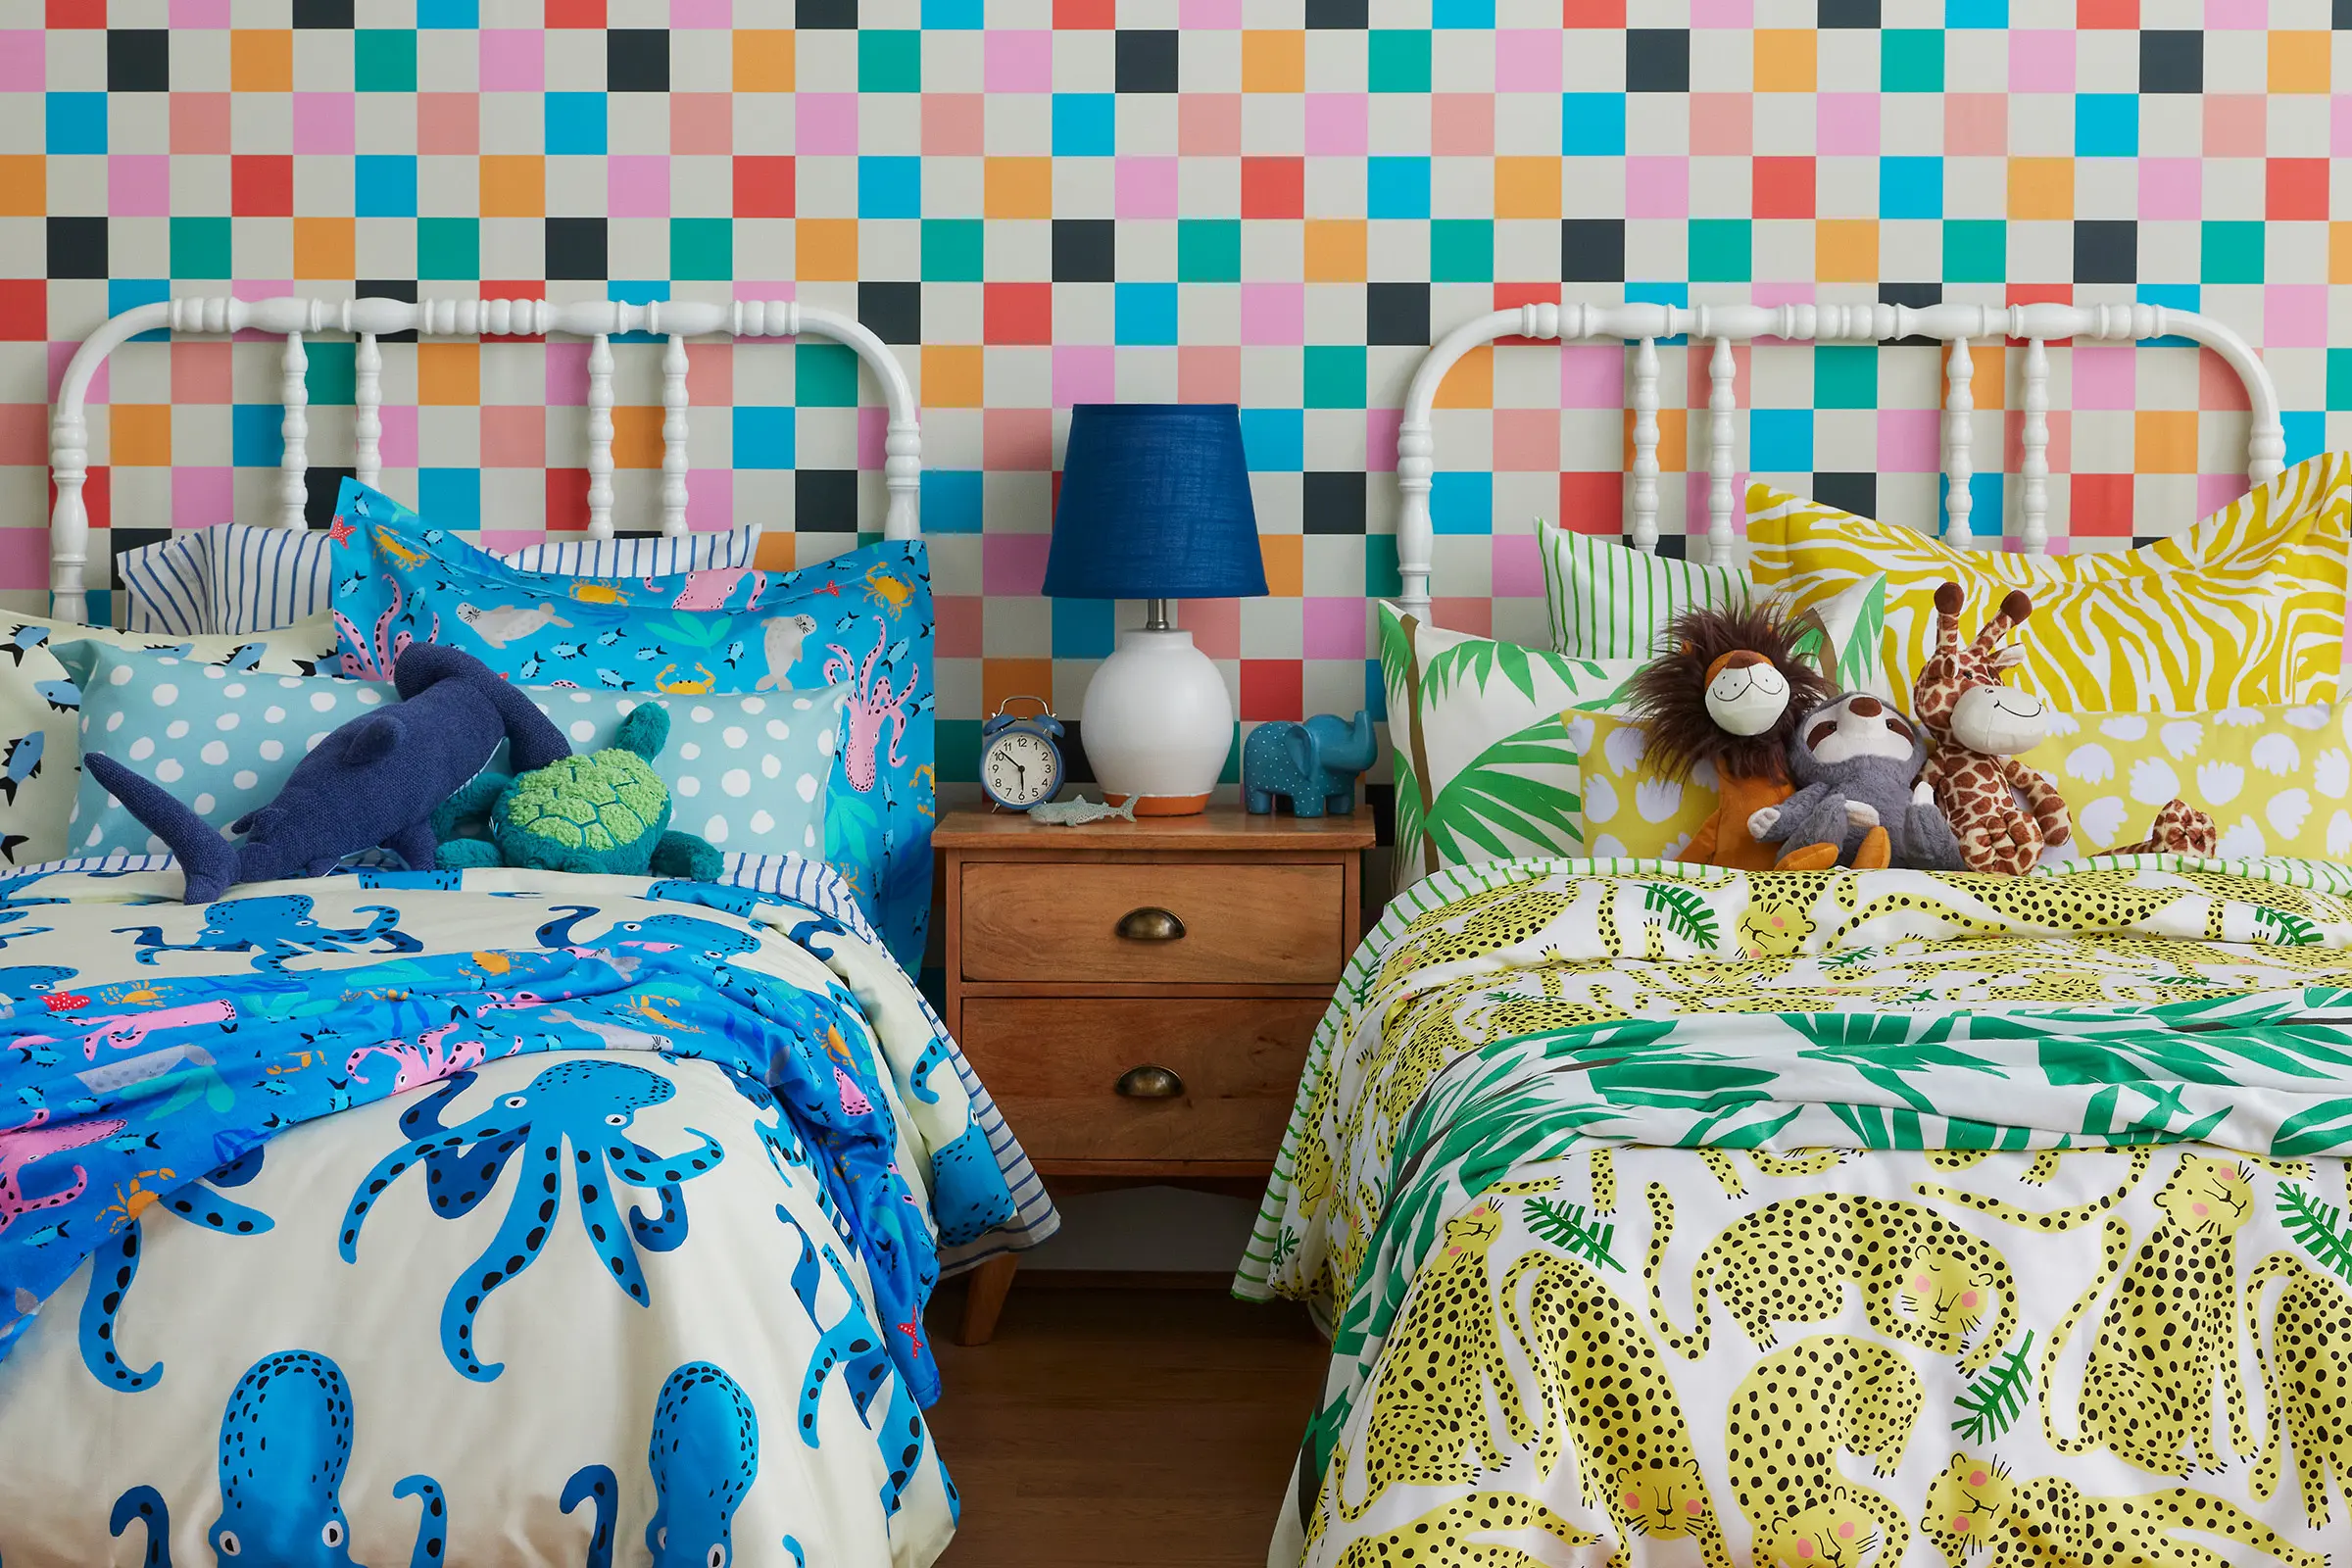 Two kids twin beds one with blue octopus bedding and one with yellow tiger bedding